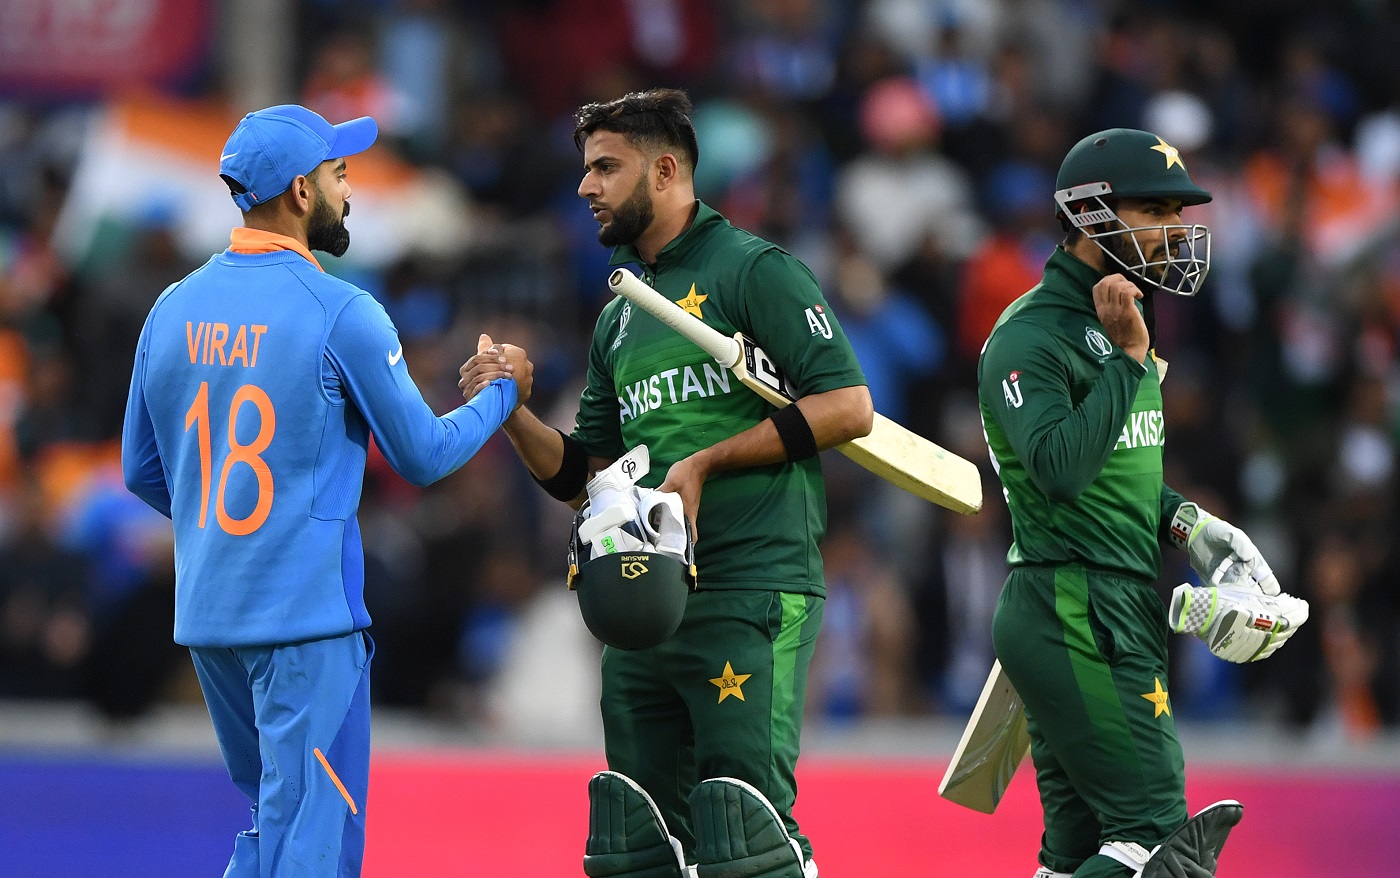 T20 World Cup 2021 - India and Pakistan have great T20I records since the last World Cup. So are they favourites?